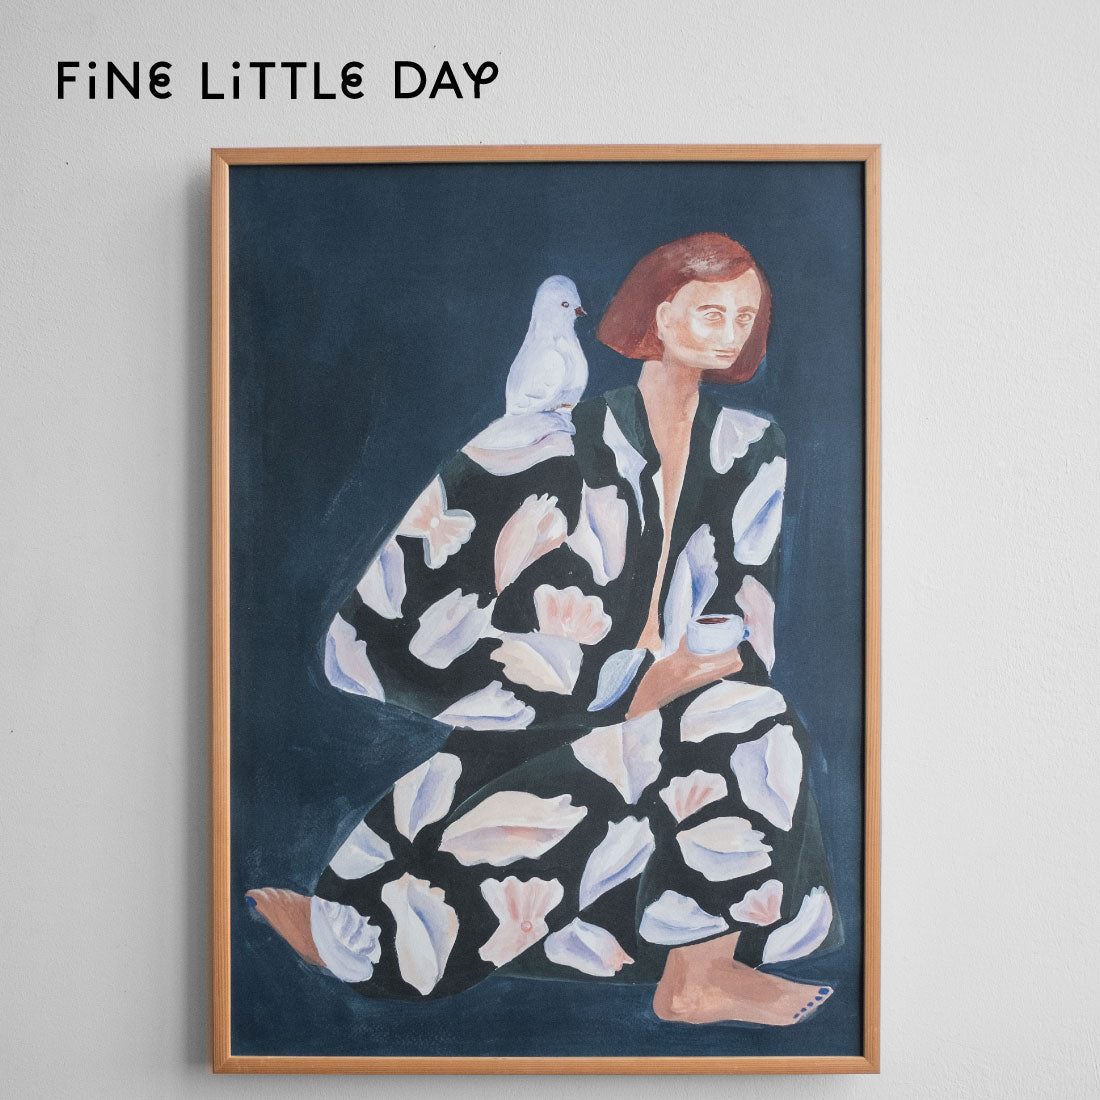 Fine Little Day ポスター SOFIA LIND SPECIAL ARTIST EDITION, SKRUD 